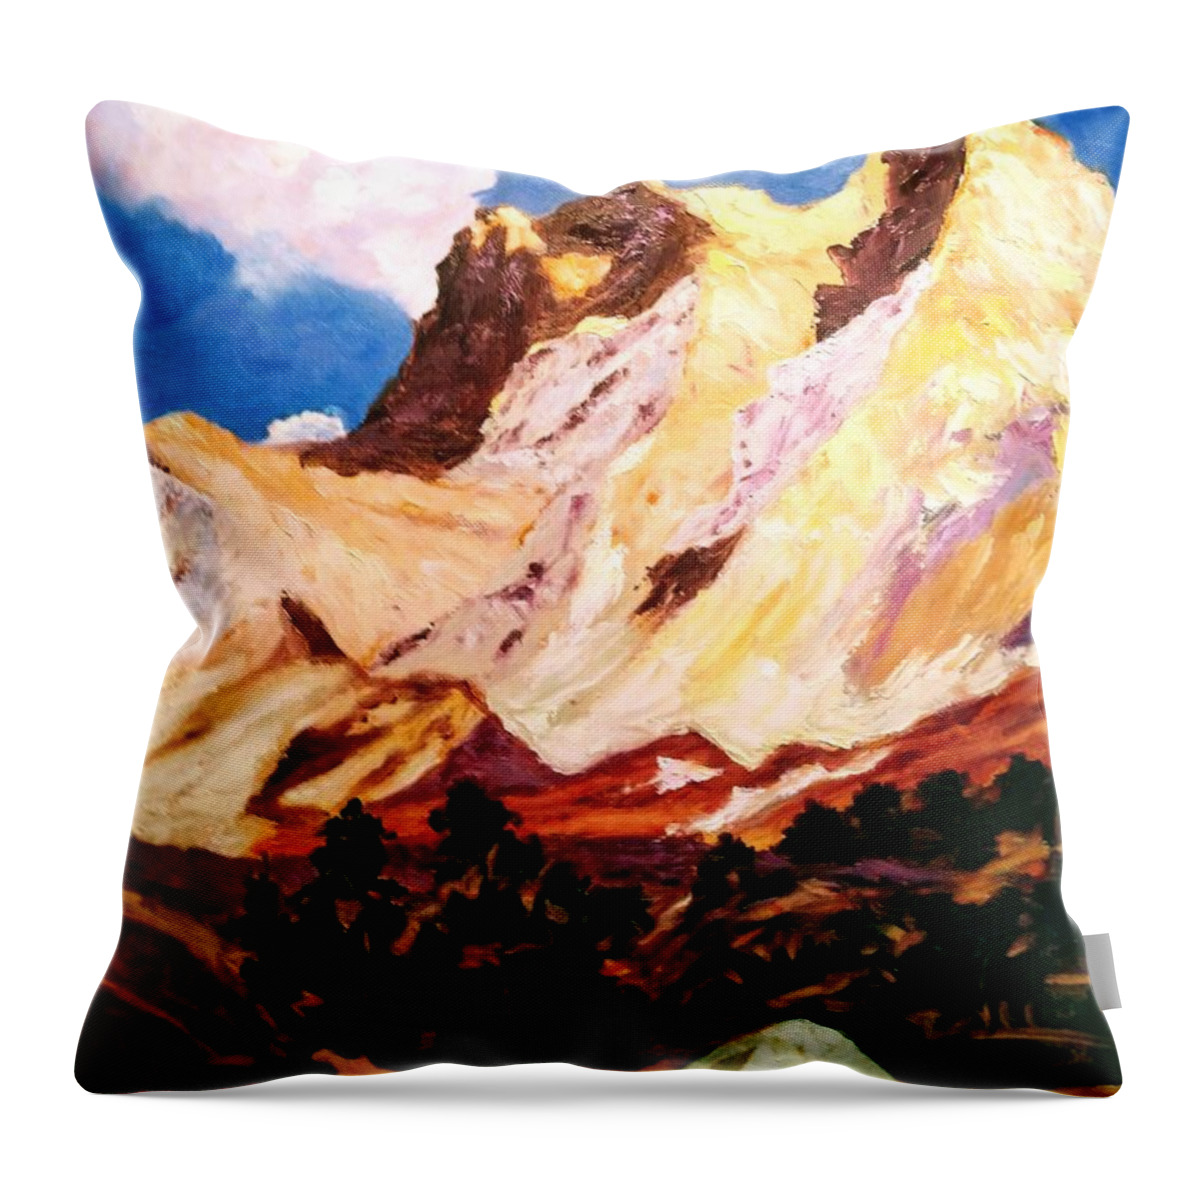 Settlers Throw Pillow featuring the painting Settlers by Ray Khalife